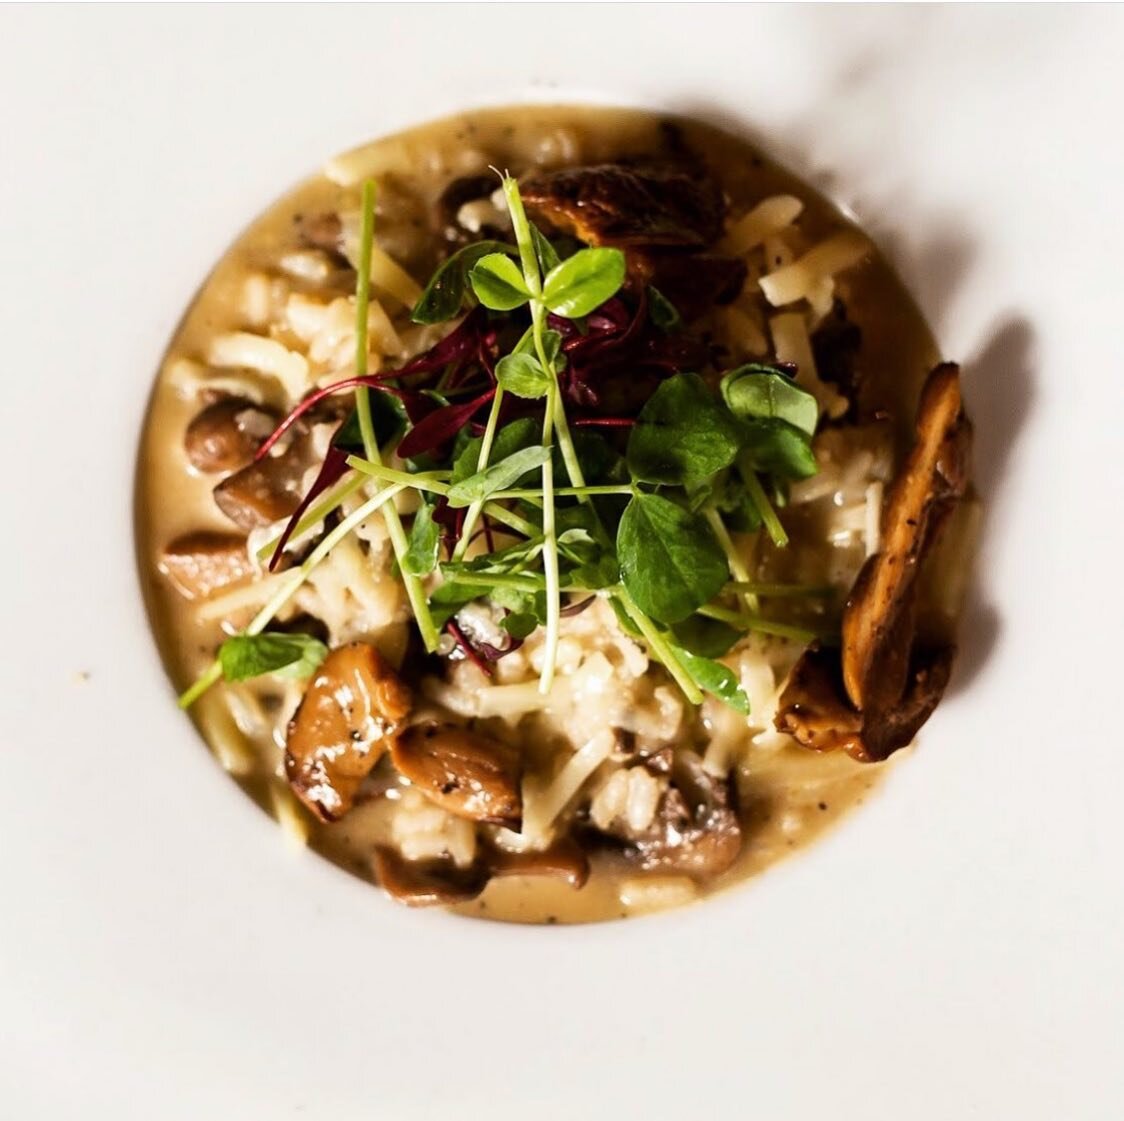 Back by popular demand!!! Endswell&rsquo;s Porcini Risotto is on the menu once again to get you through these winter months: Market fresh mushrooms, aged Parmesan and hazelnut oil make this a creamy, dreamy delight with a hint of smokiness